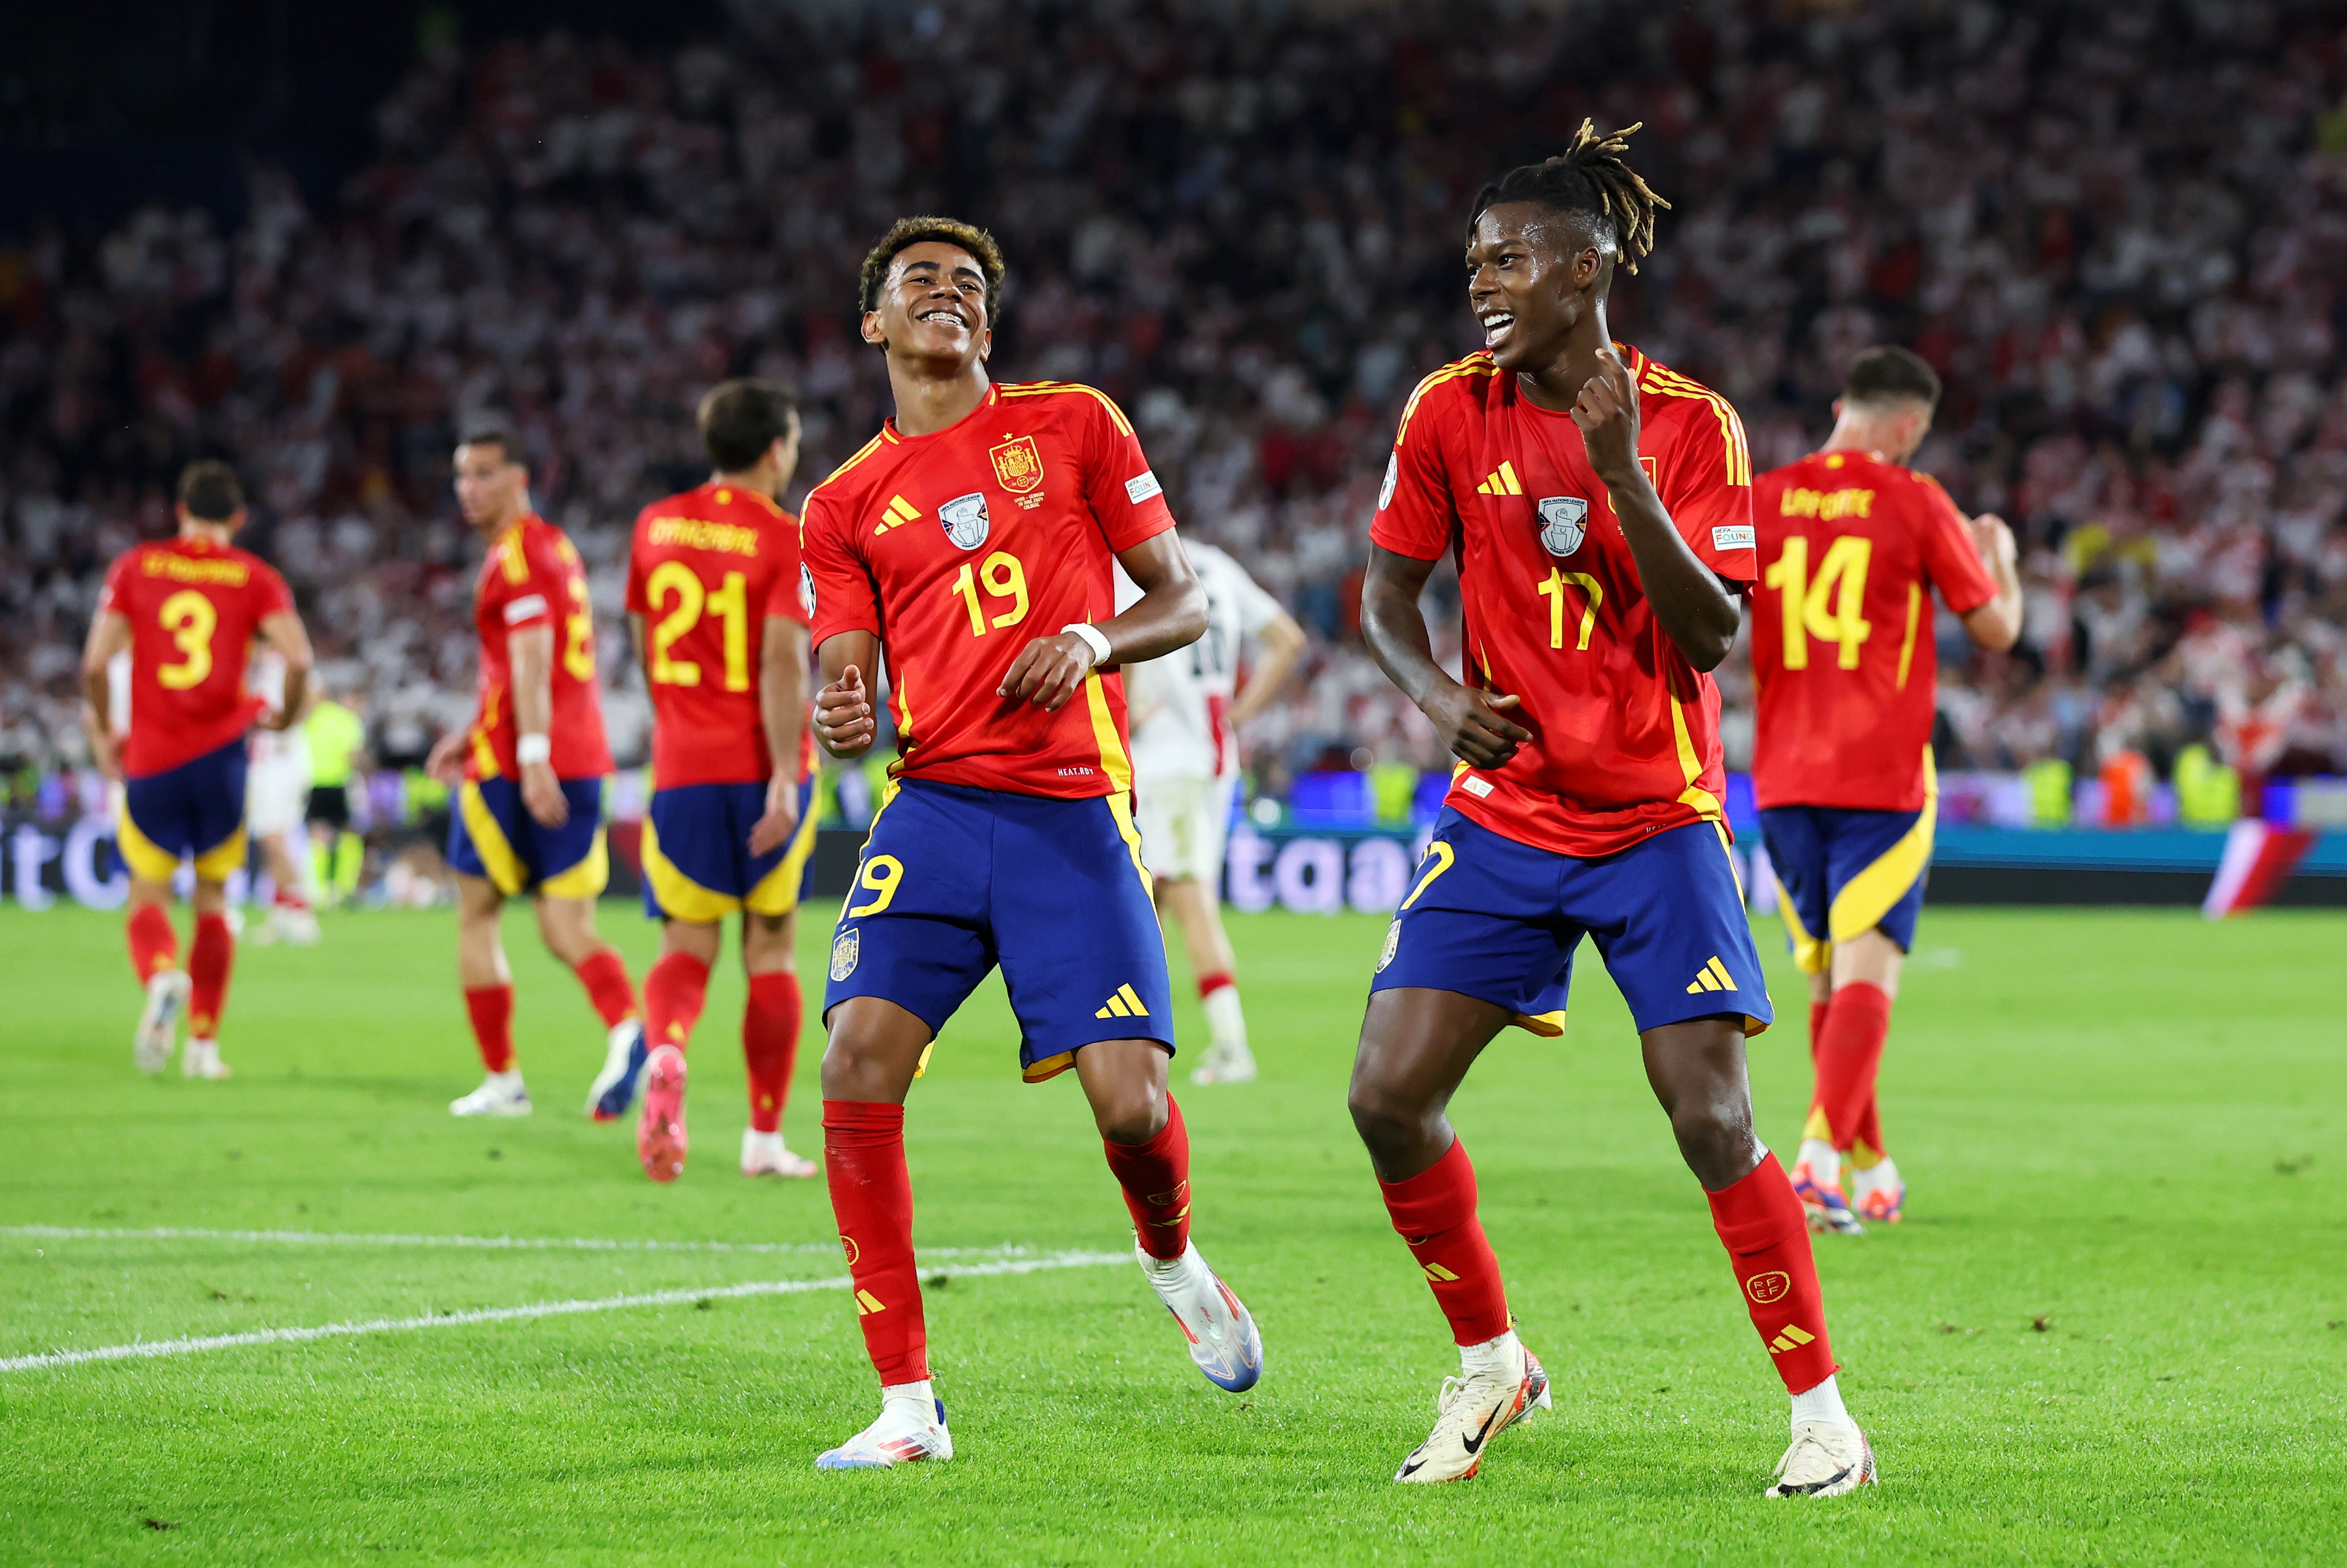 Lamine Yamal and Nico Williams have thrilled on Spain’s wings